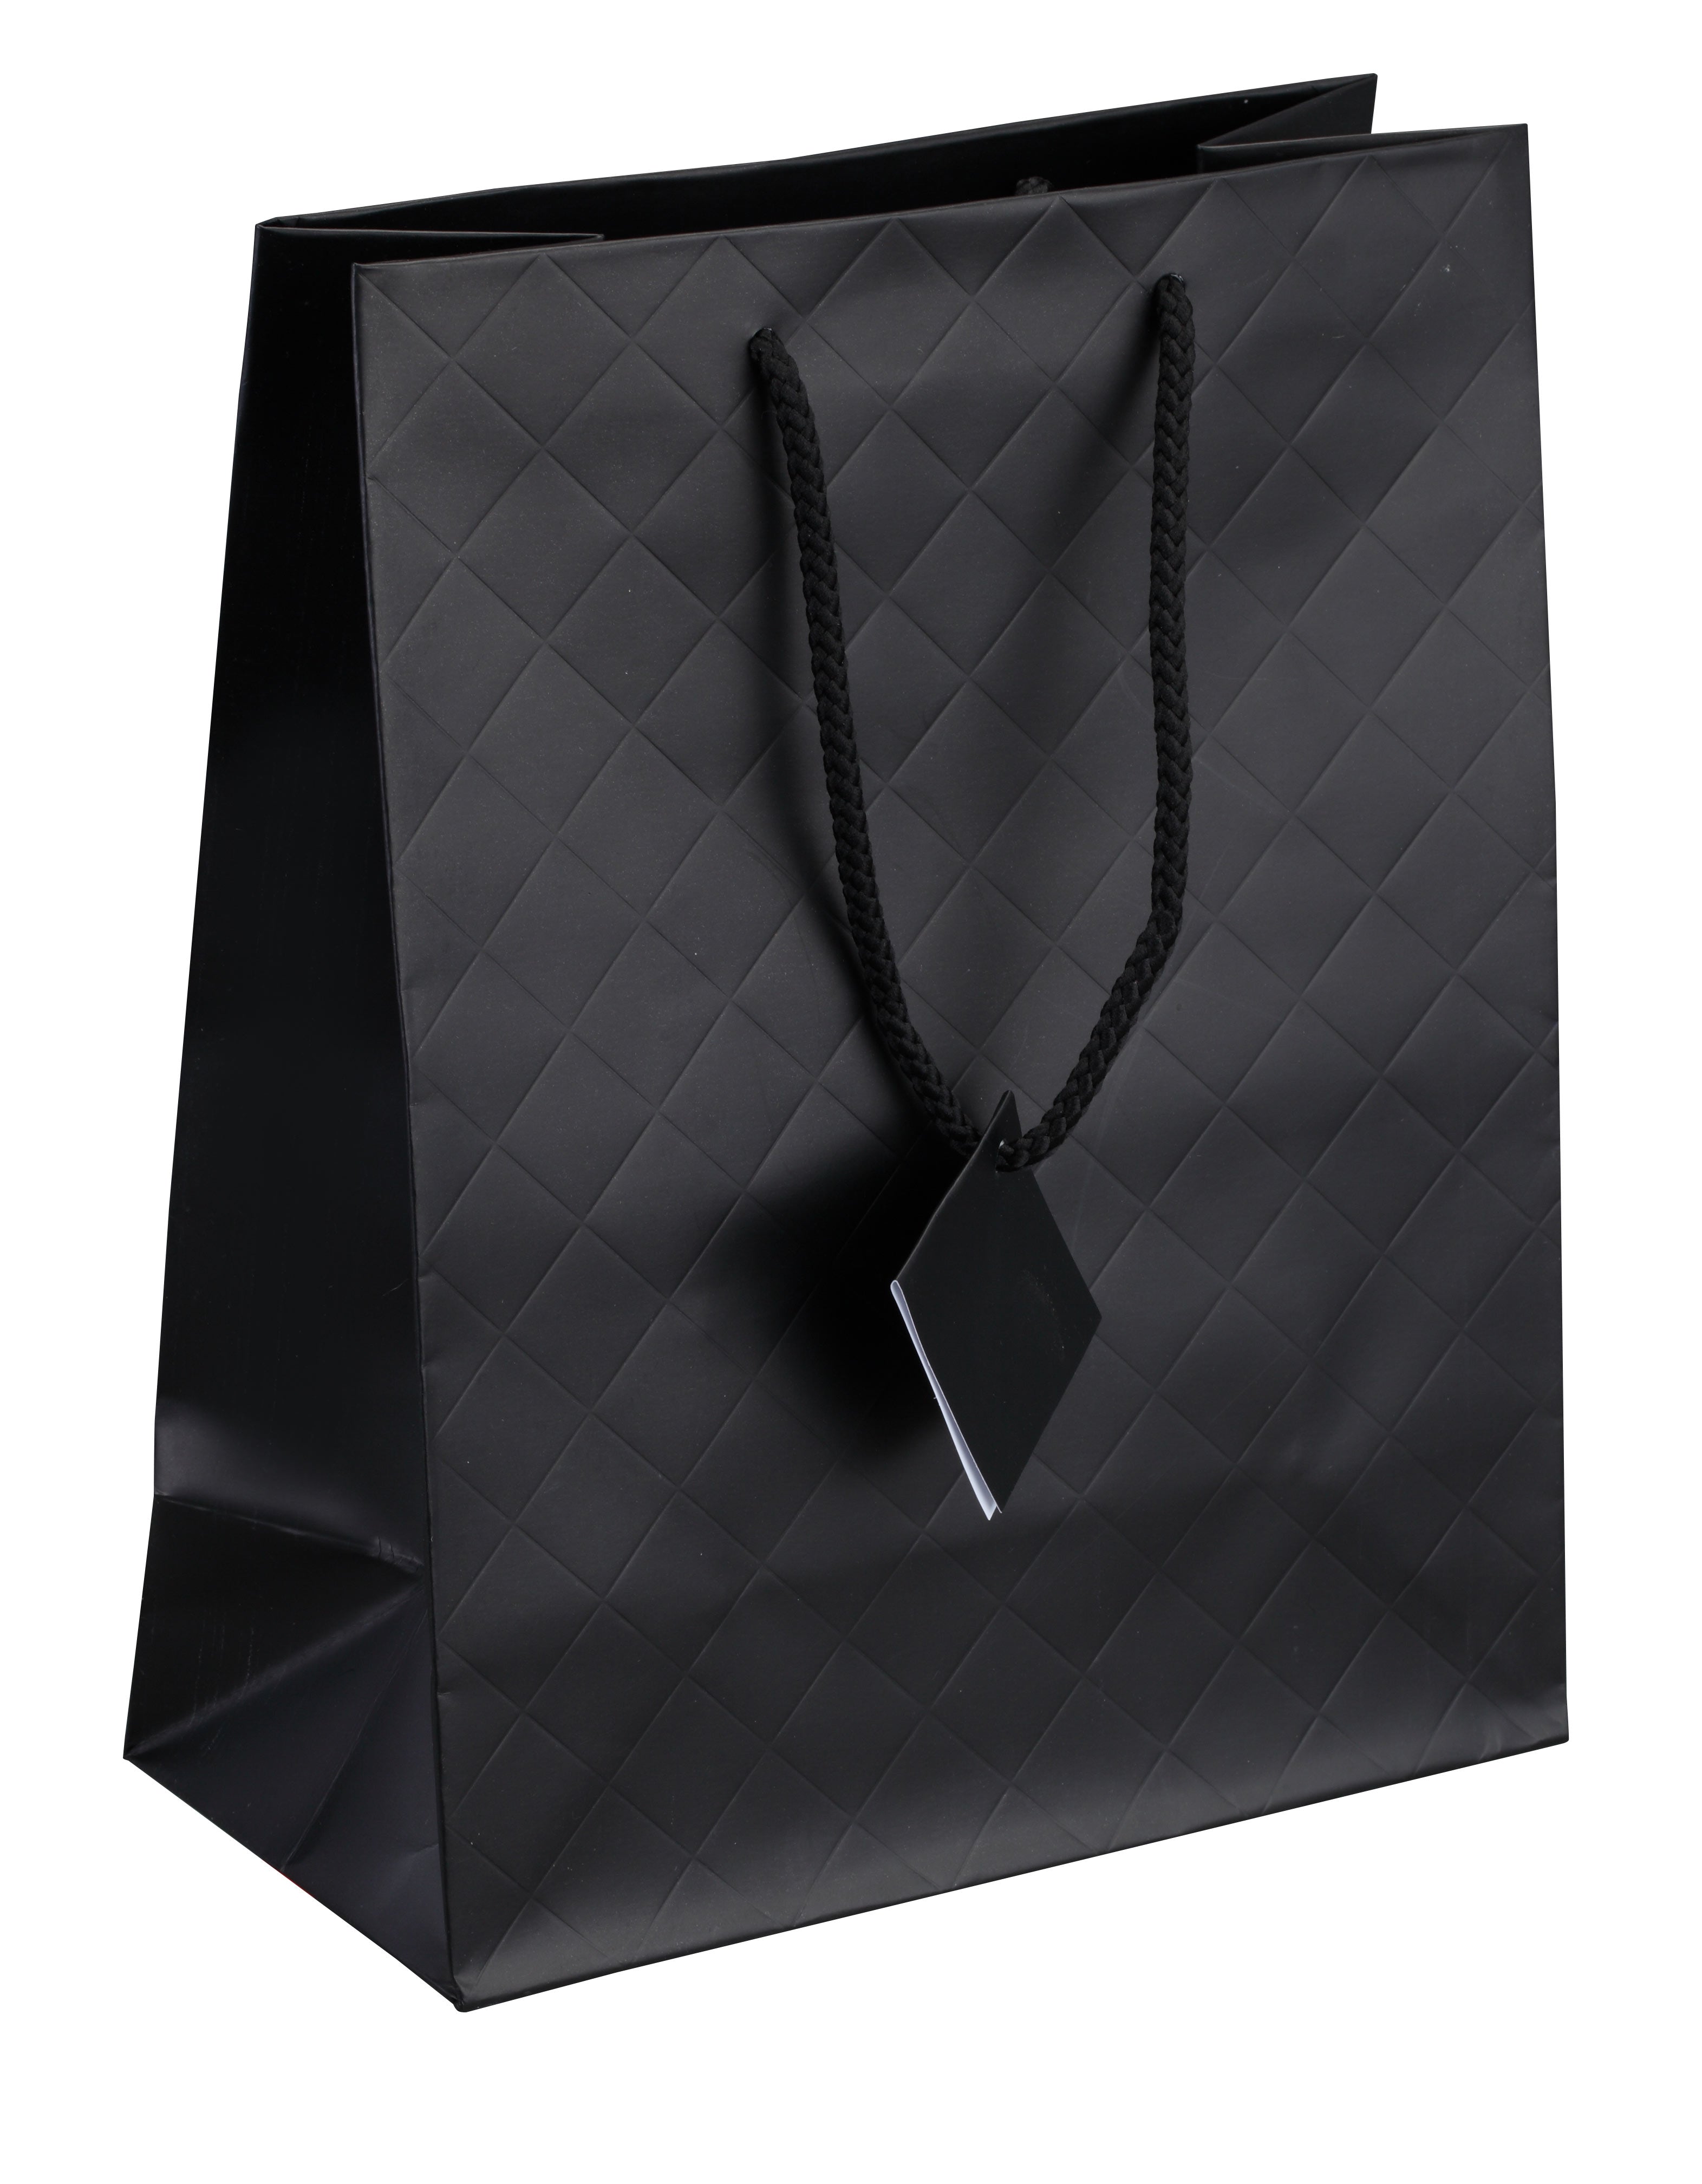 Tote-Style Gift Bags in Onyx Matelassé